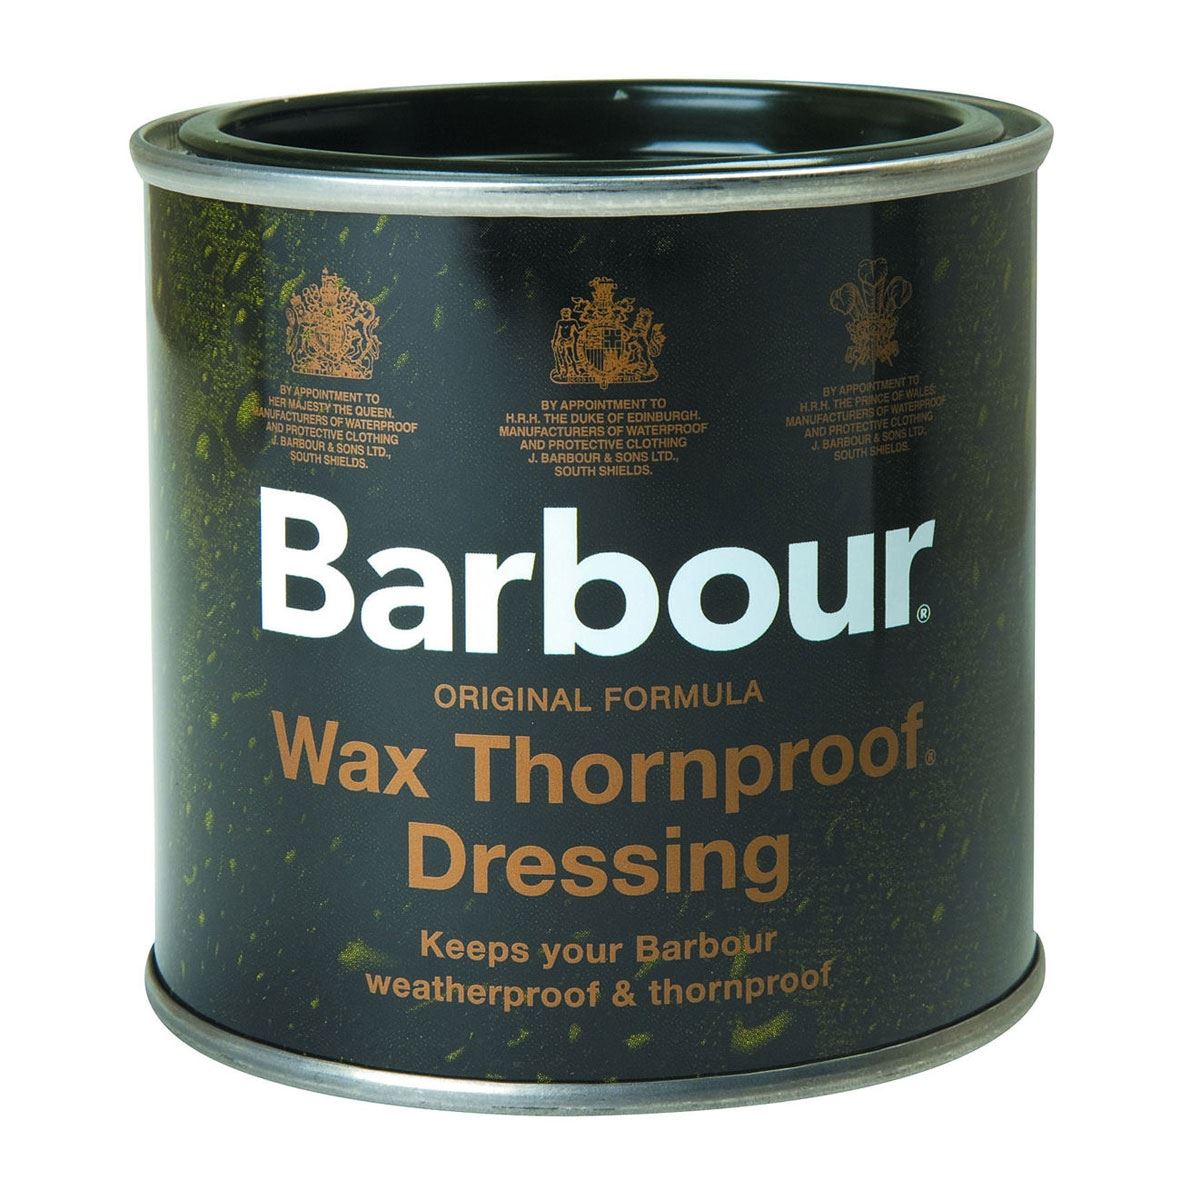 What does Barbour Wax Thornproof Dressing protect with its barbour wax formula?